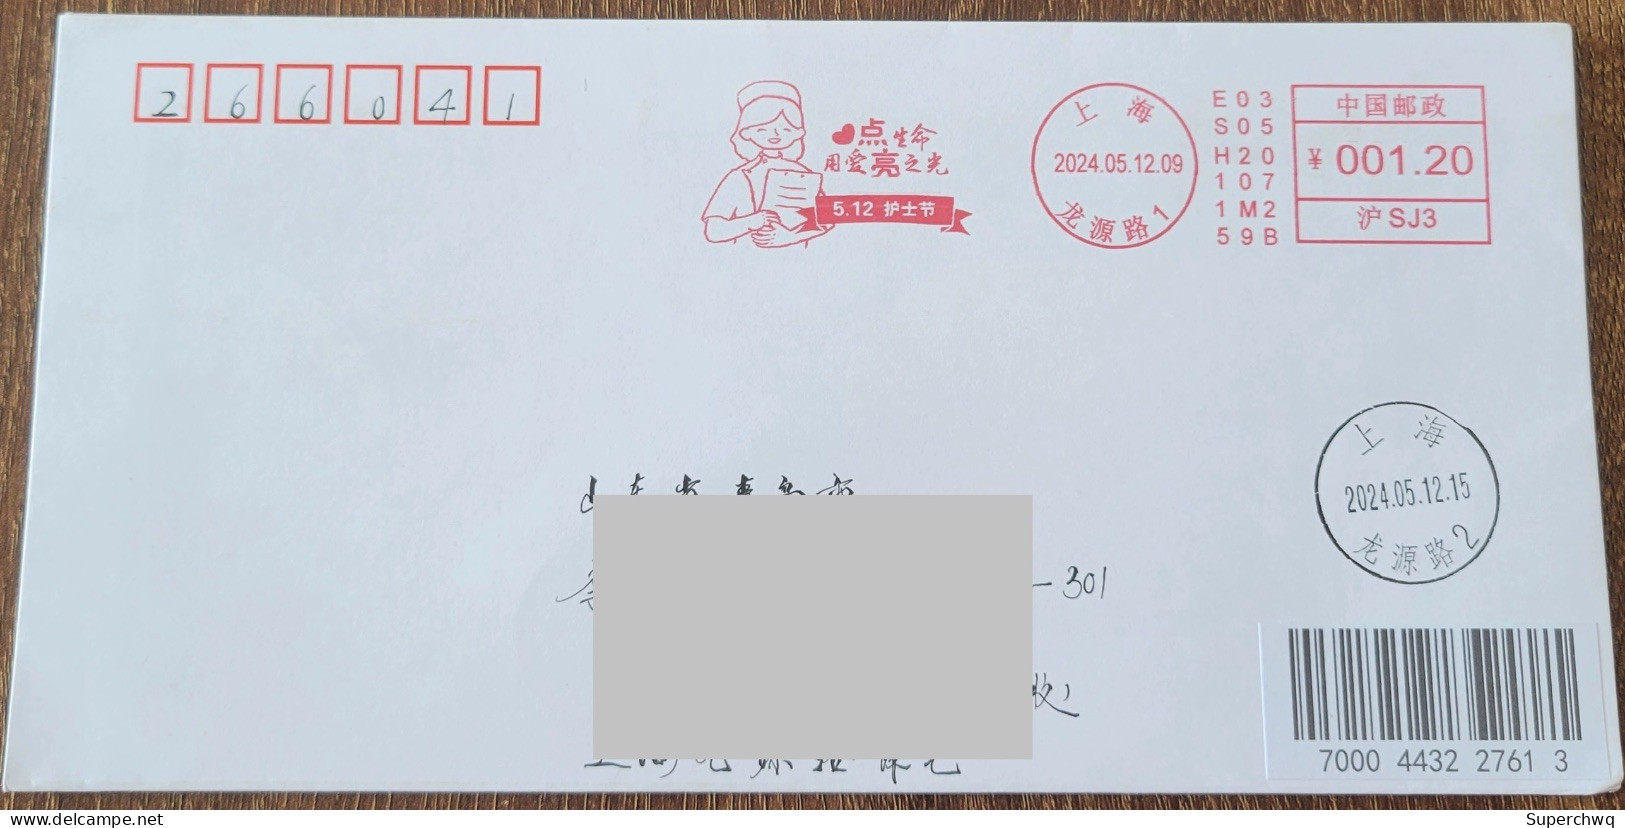 China Cover Nurse's Day (Shanghai) Postage Machine Stamp First Day Actual Delivery Seal - Covers